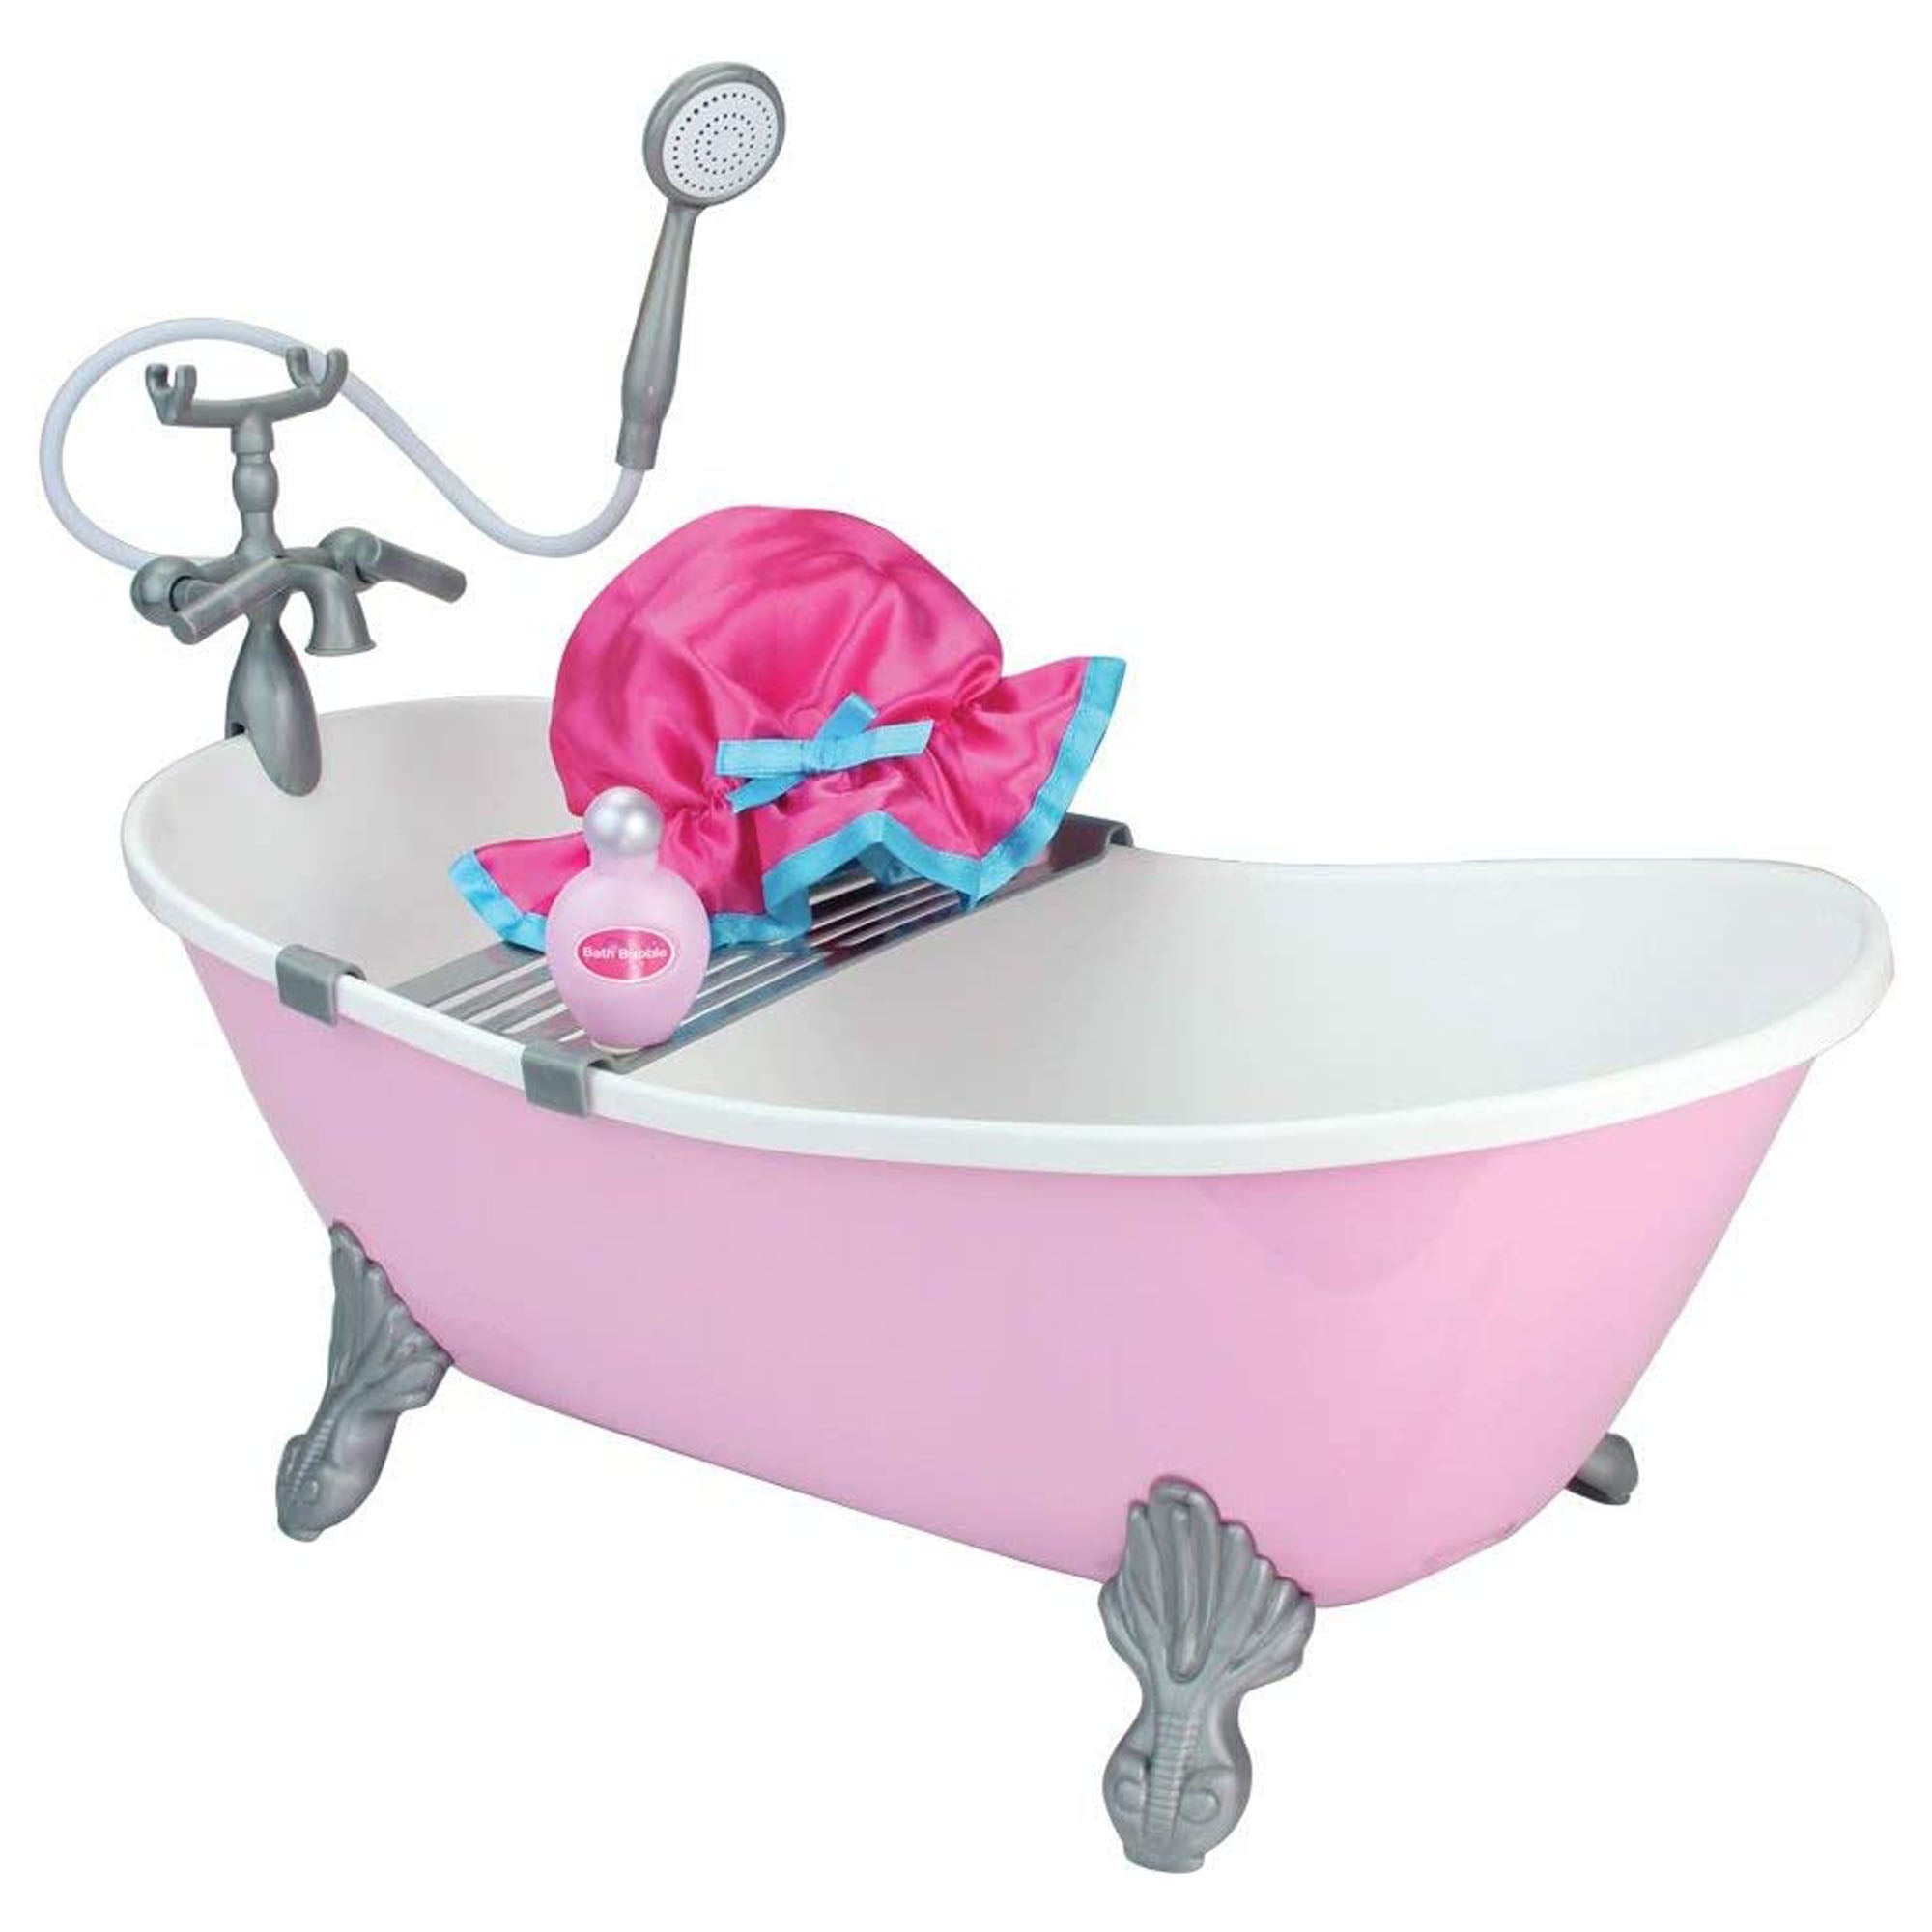 Sophia’s Pink Bathtub and Shower Accessories Set for 18" Dolls